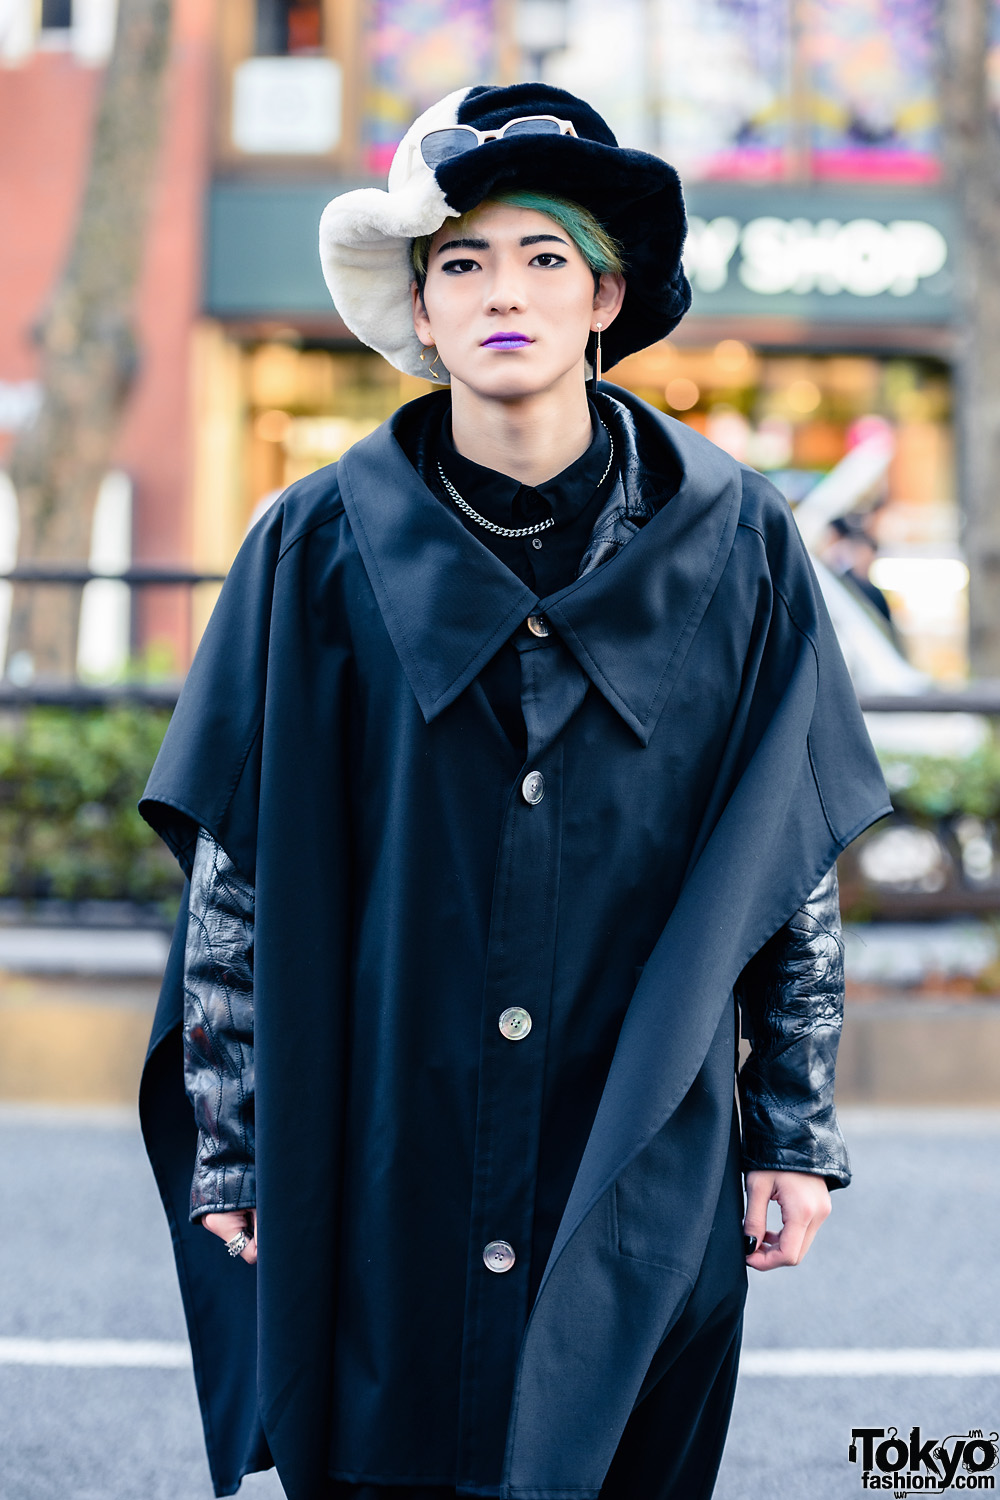 All Black Harajuku Street Style w/ Furry Two-Tone Hat, Mismatched ...